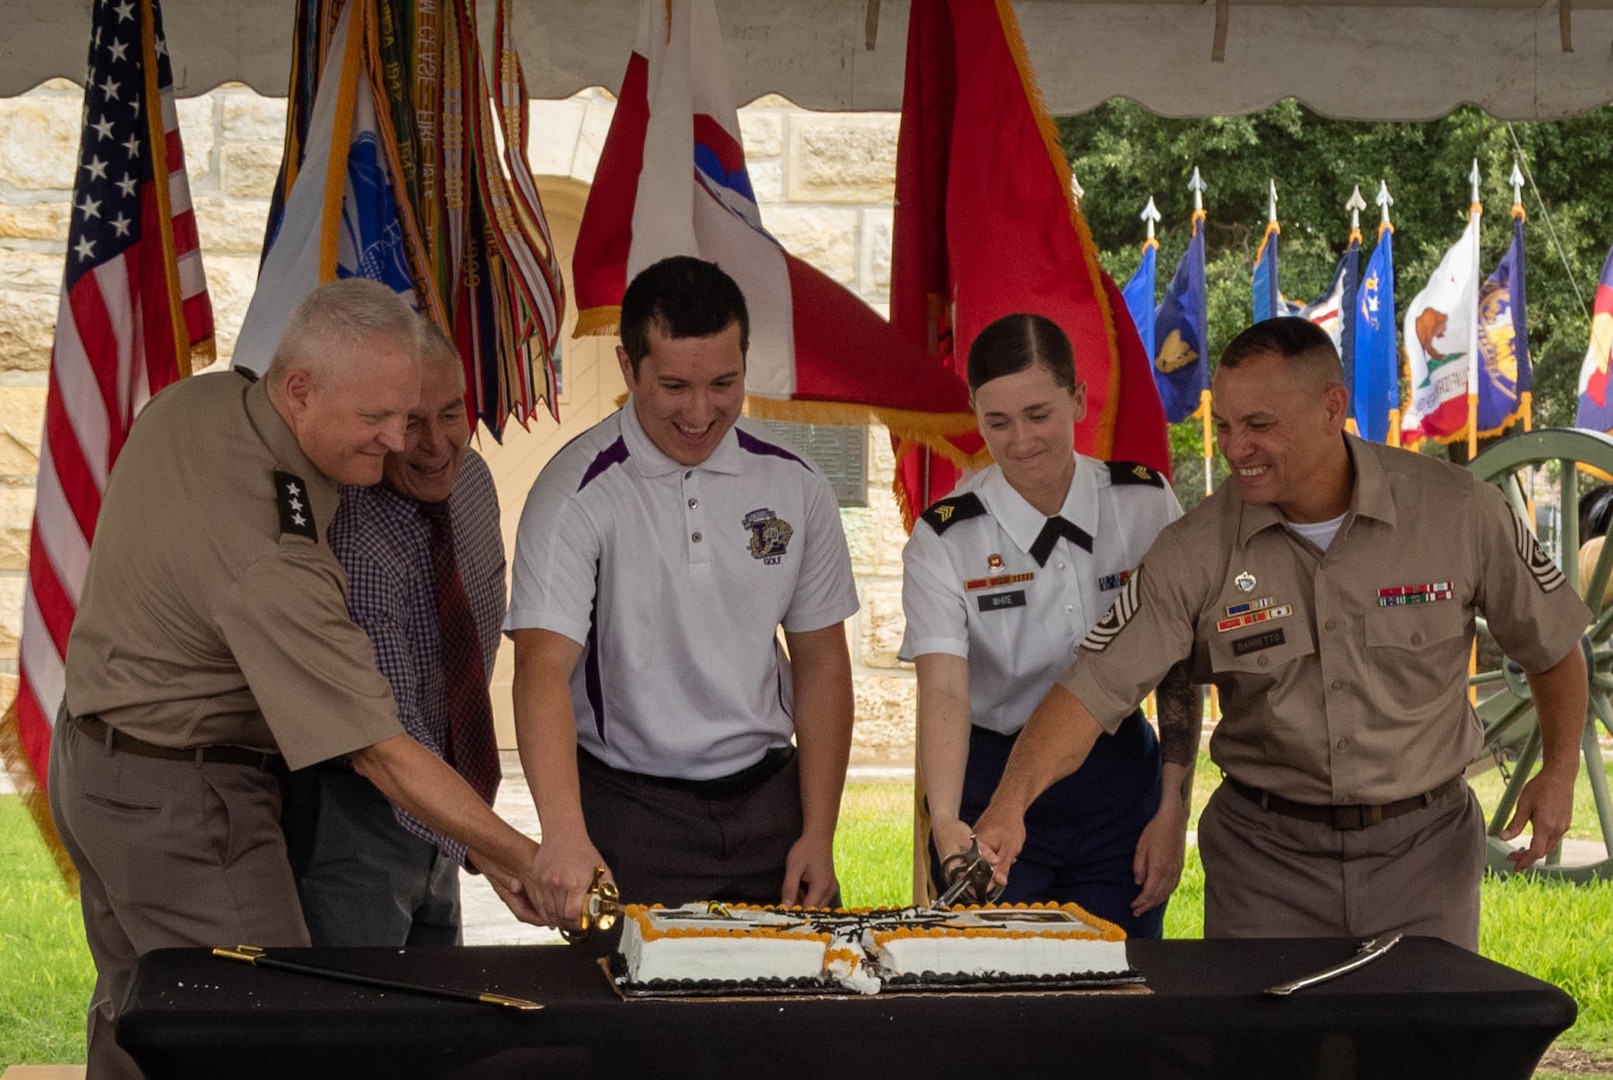 U.S. Army Lt. Gen. John R. Evans, commanding general of Army North, Command Sgt. Maj. Phil K. Barretto, senior enlisted advisor of Army North, and others cut the birthday cake during the Army’s 247th birthday celebration, held at Joint Base San Antonio-Fort Sam Houston, Texas, June 14, 2022. The Army’s annual birthday celebration highlights total force history and tradition, and commemorates the continuous commitment to defending America 24/7. (U.S. Army Photo by Spc. Andrea Kent)